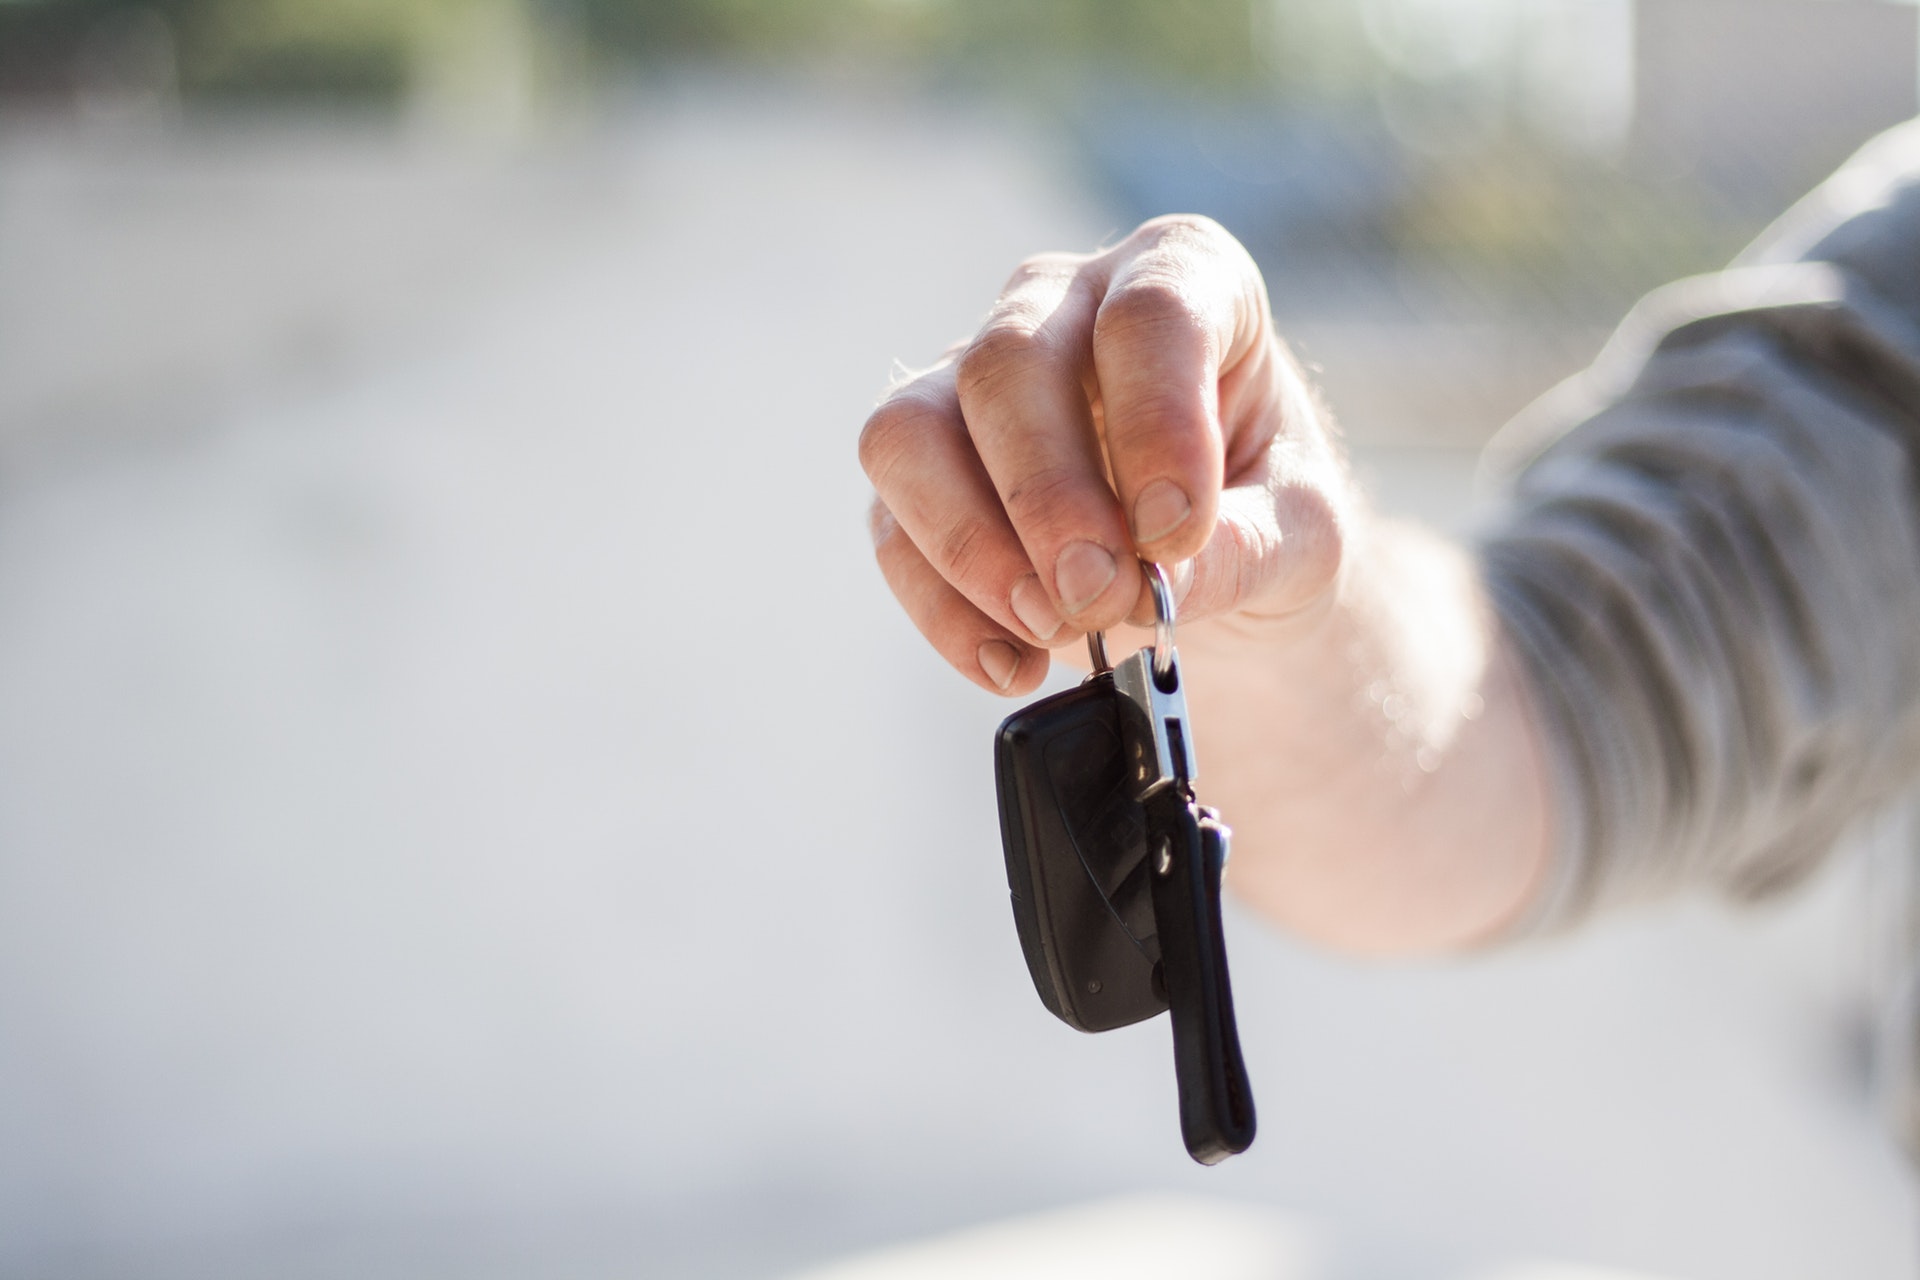 Pros and Cons of Refinancing Your Auto Loan